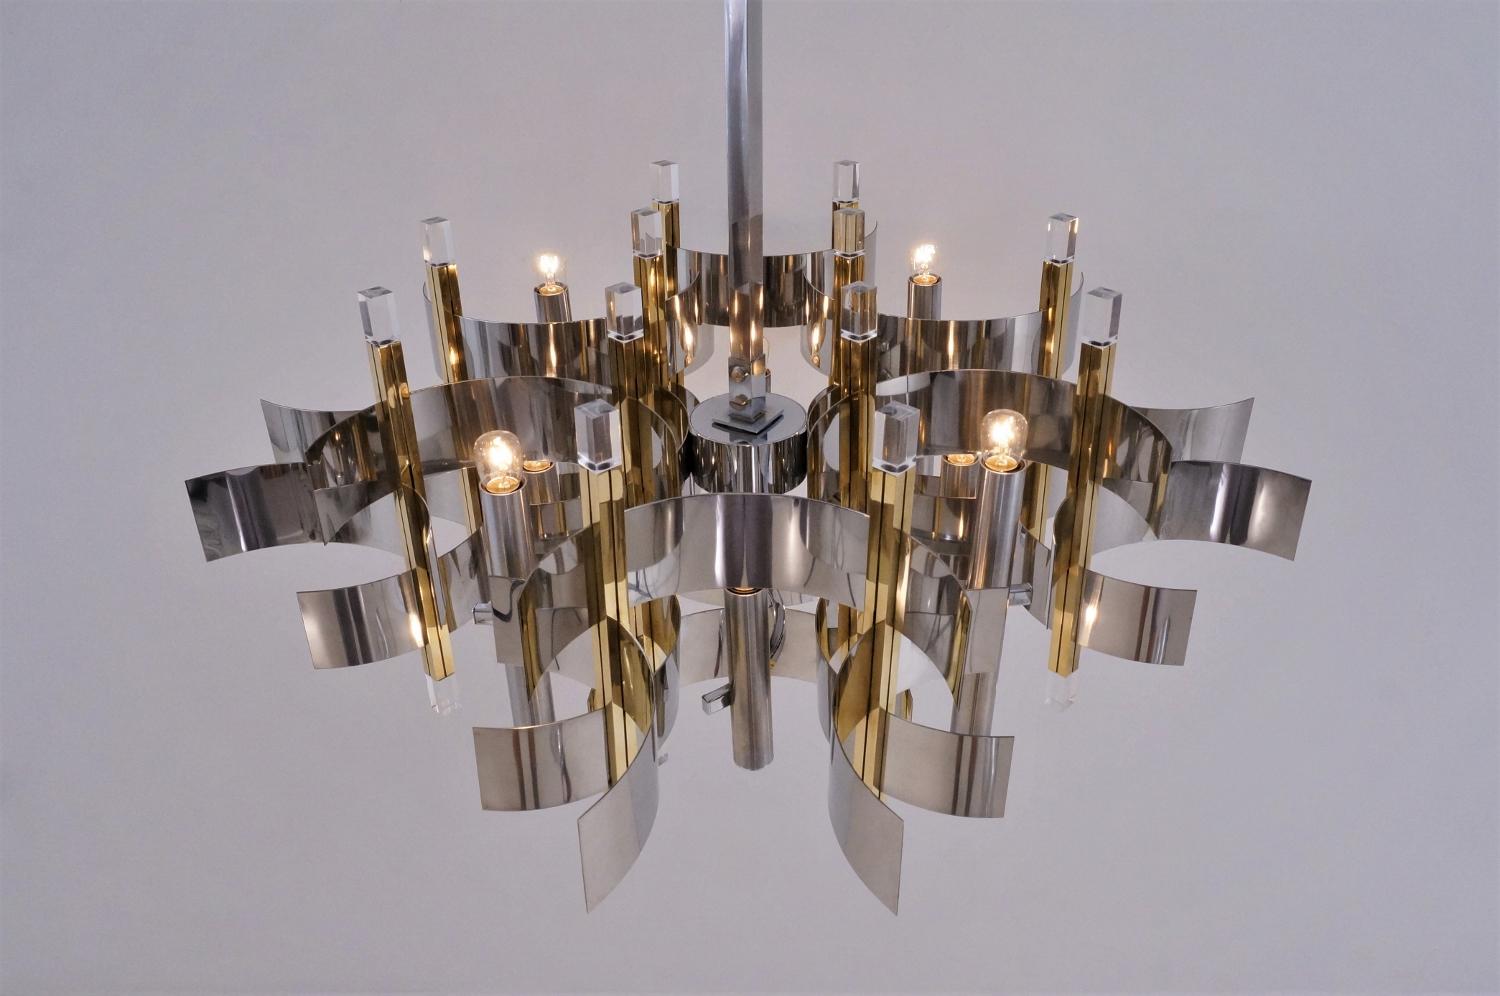 Sciolari chandelier `Futura` series, 12-lights on a frame made of brass, chrome and Lucite, 1976, Italian.

This design by Gaetano Sciolari was featured in the 1976 Lightolier catalogue, as in the last photograph.

This chandelier has been